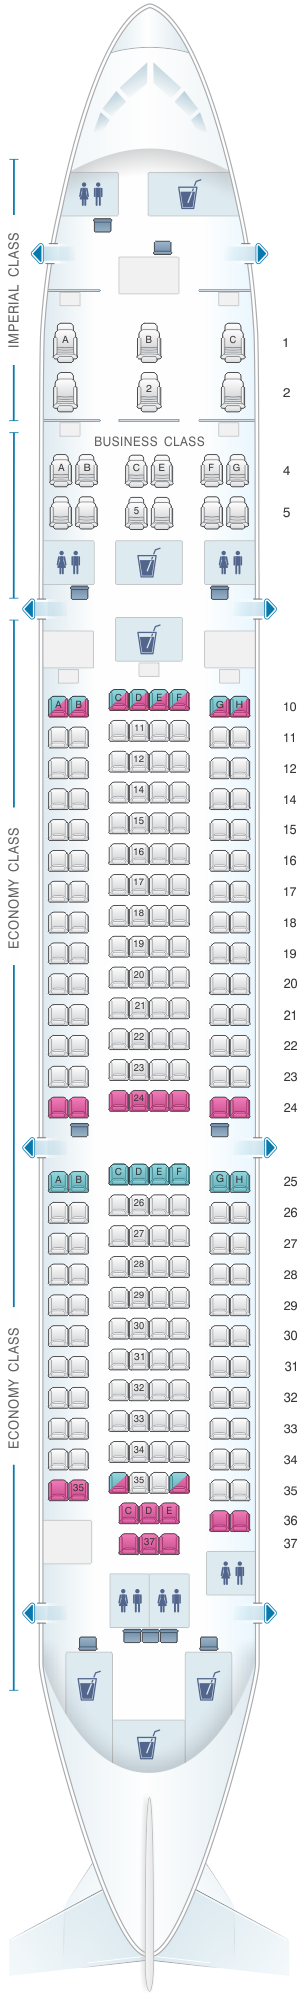 Seat map for Transaero Airlines Boeing B767 300 Config. 7